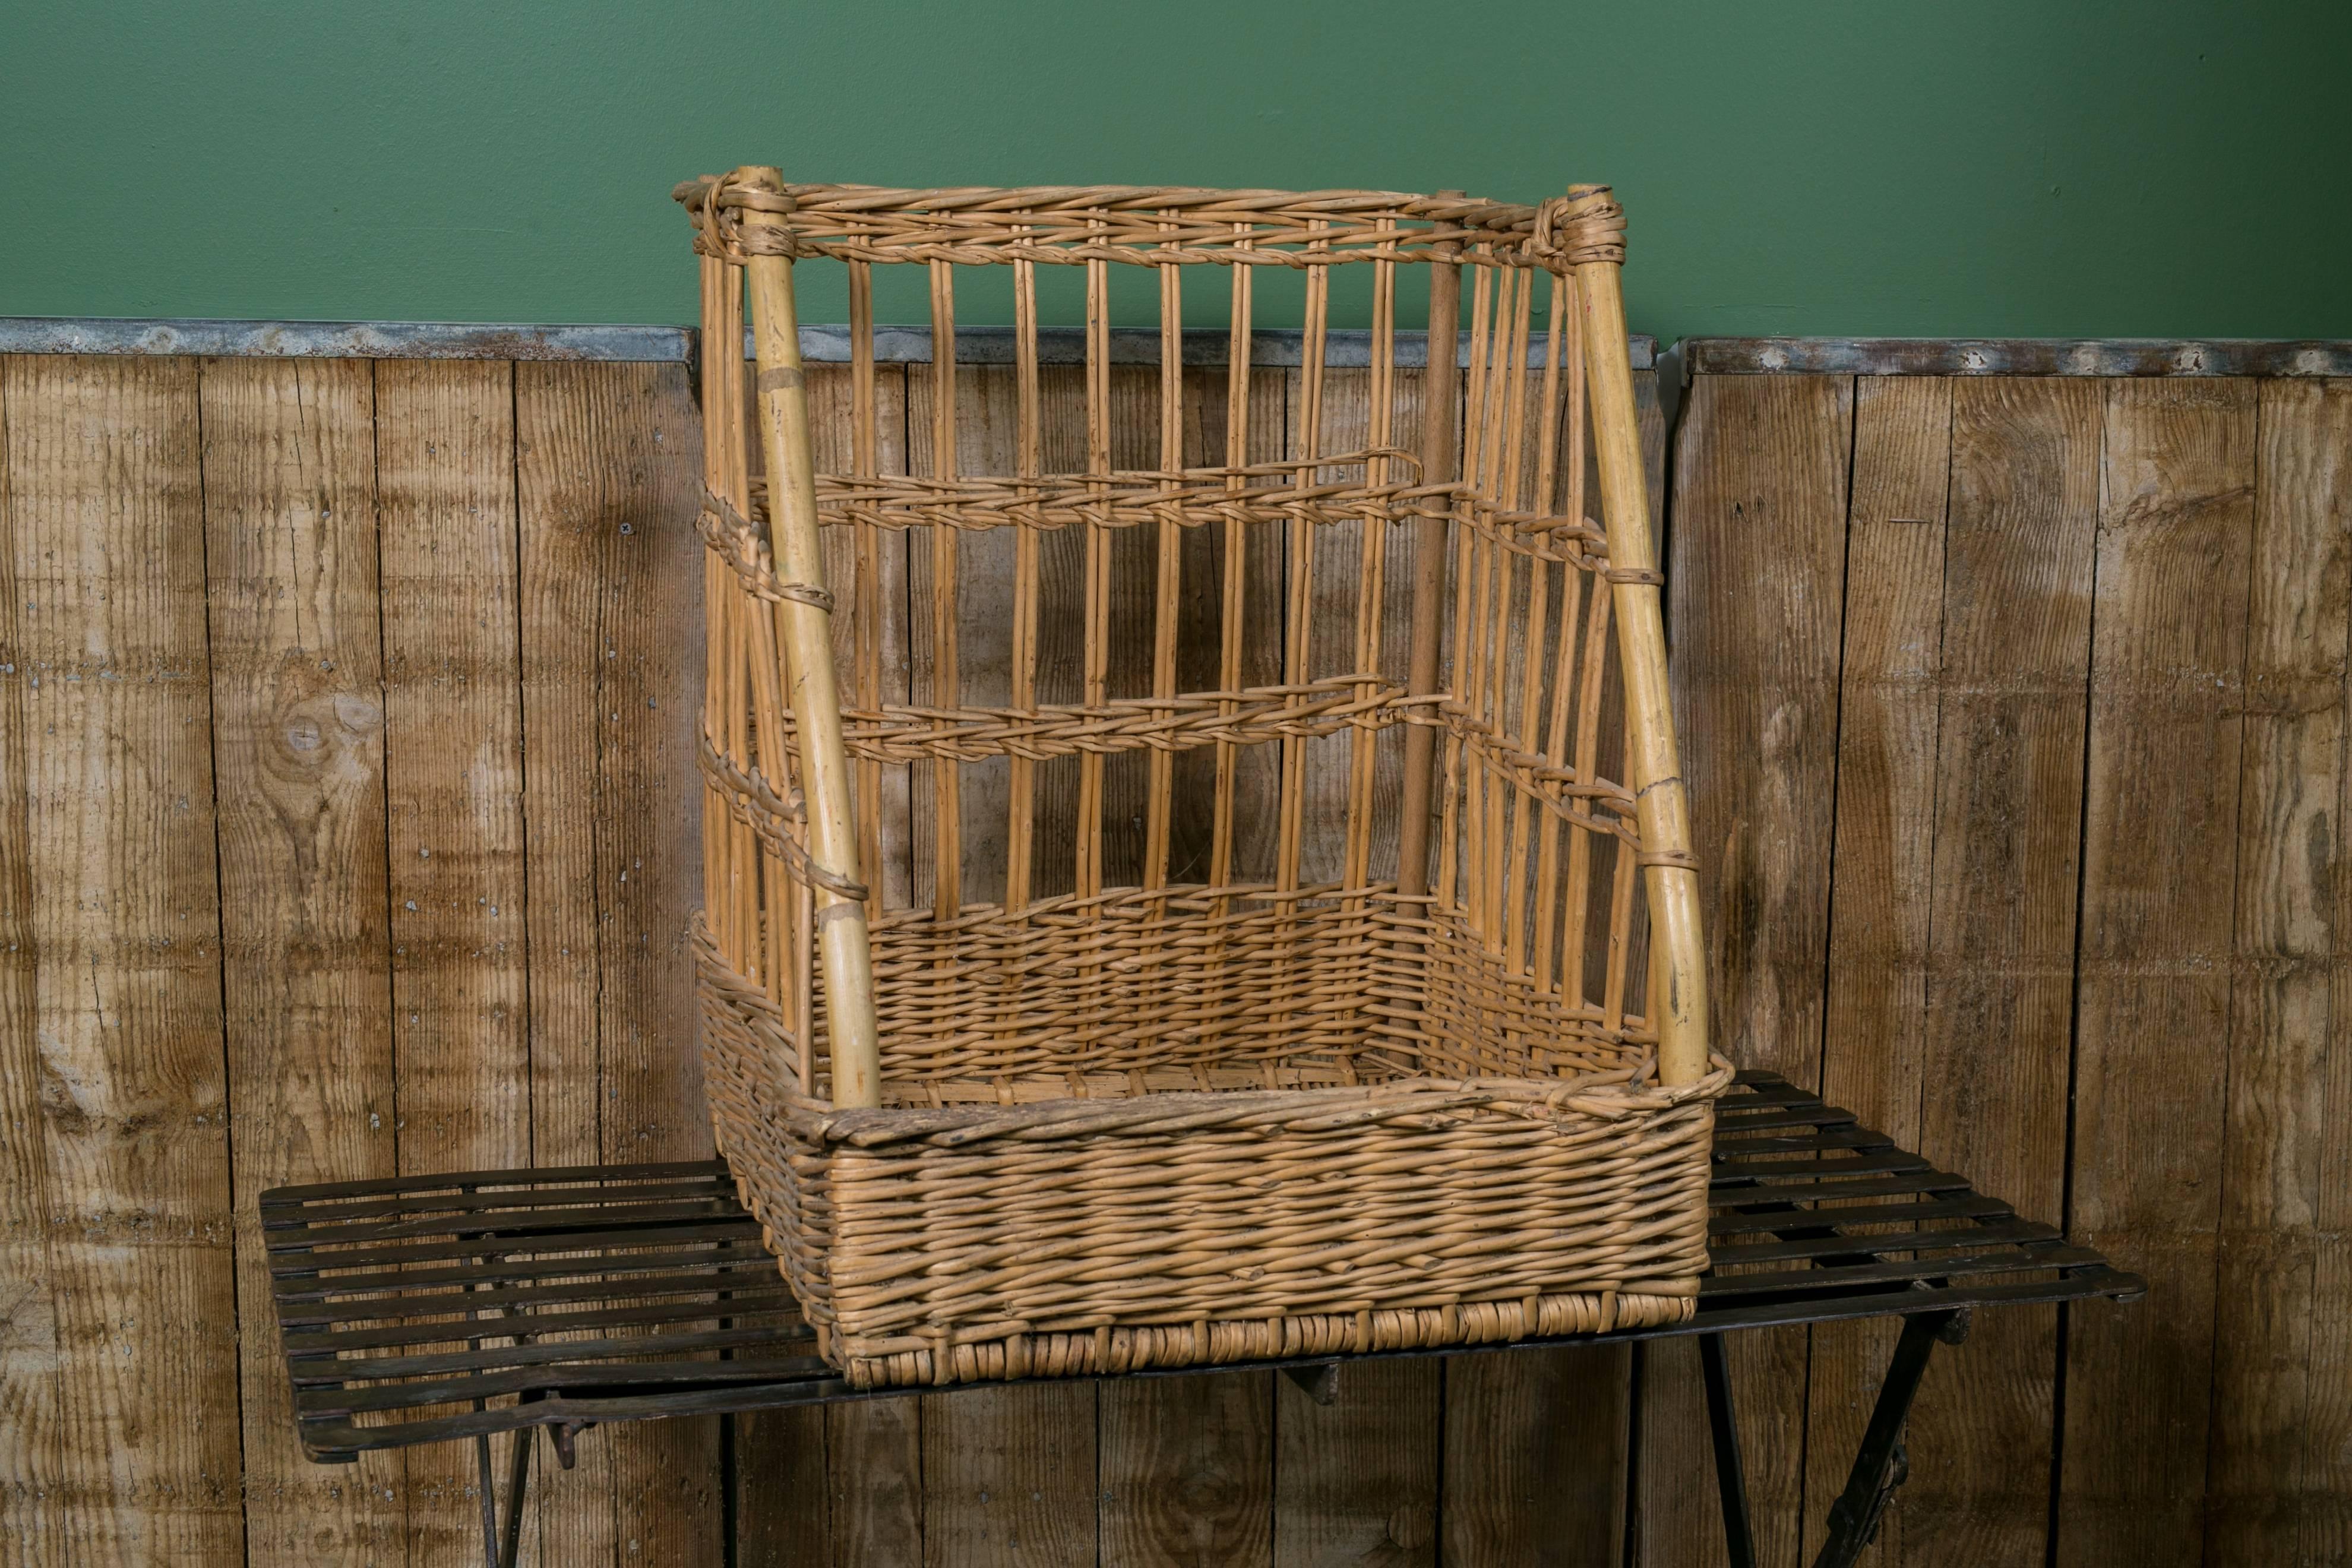 Woven wicker baguette basket used in a French bakery, circa 1960s. Front of basket has bamboo rods for support with all original parts. Would be great in a kitchen or office as an organizational piece.